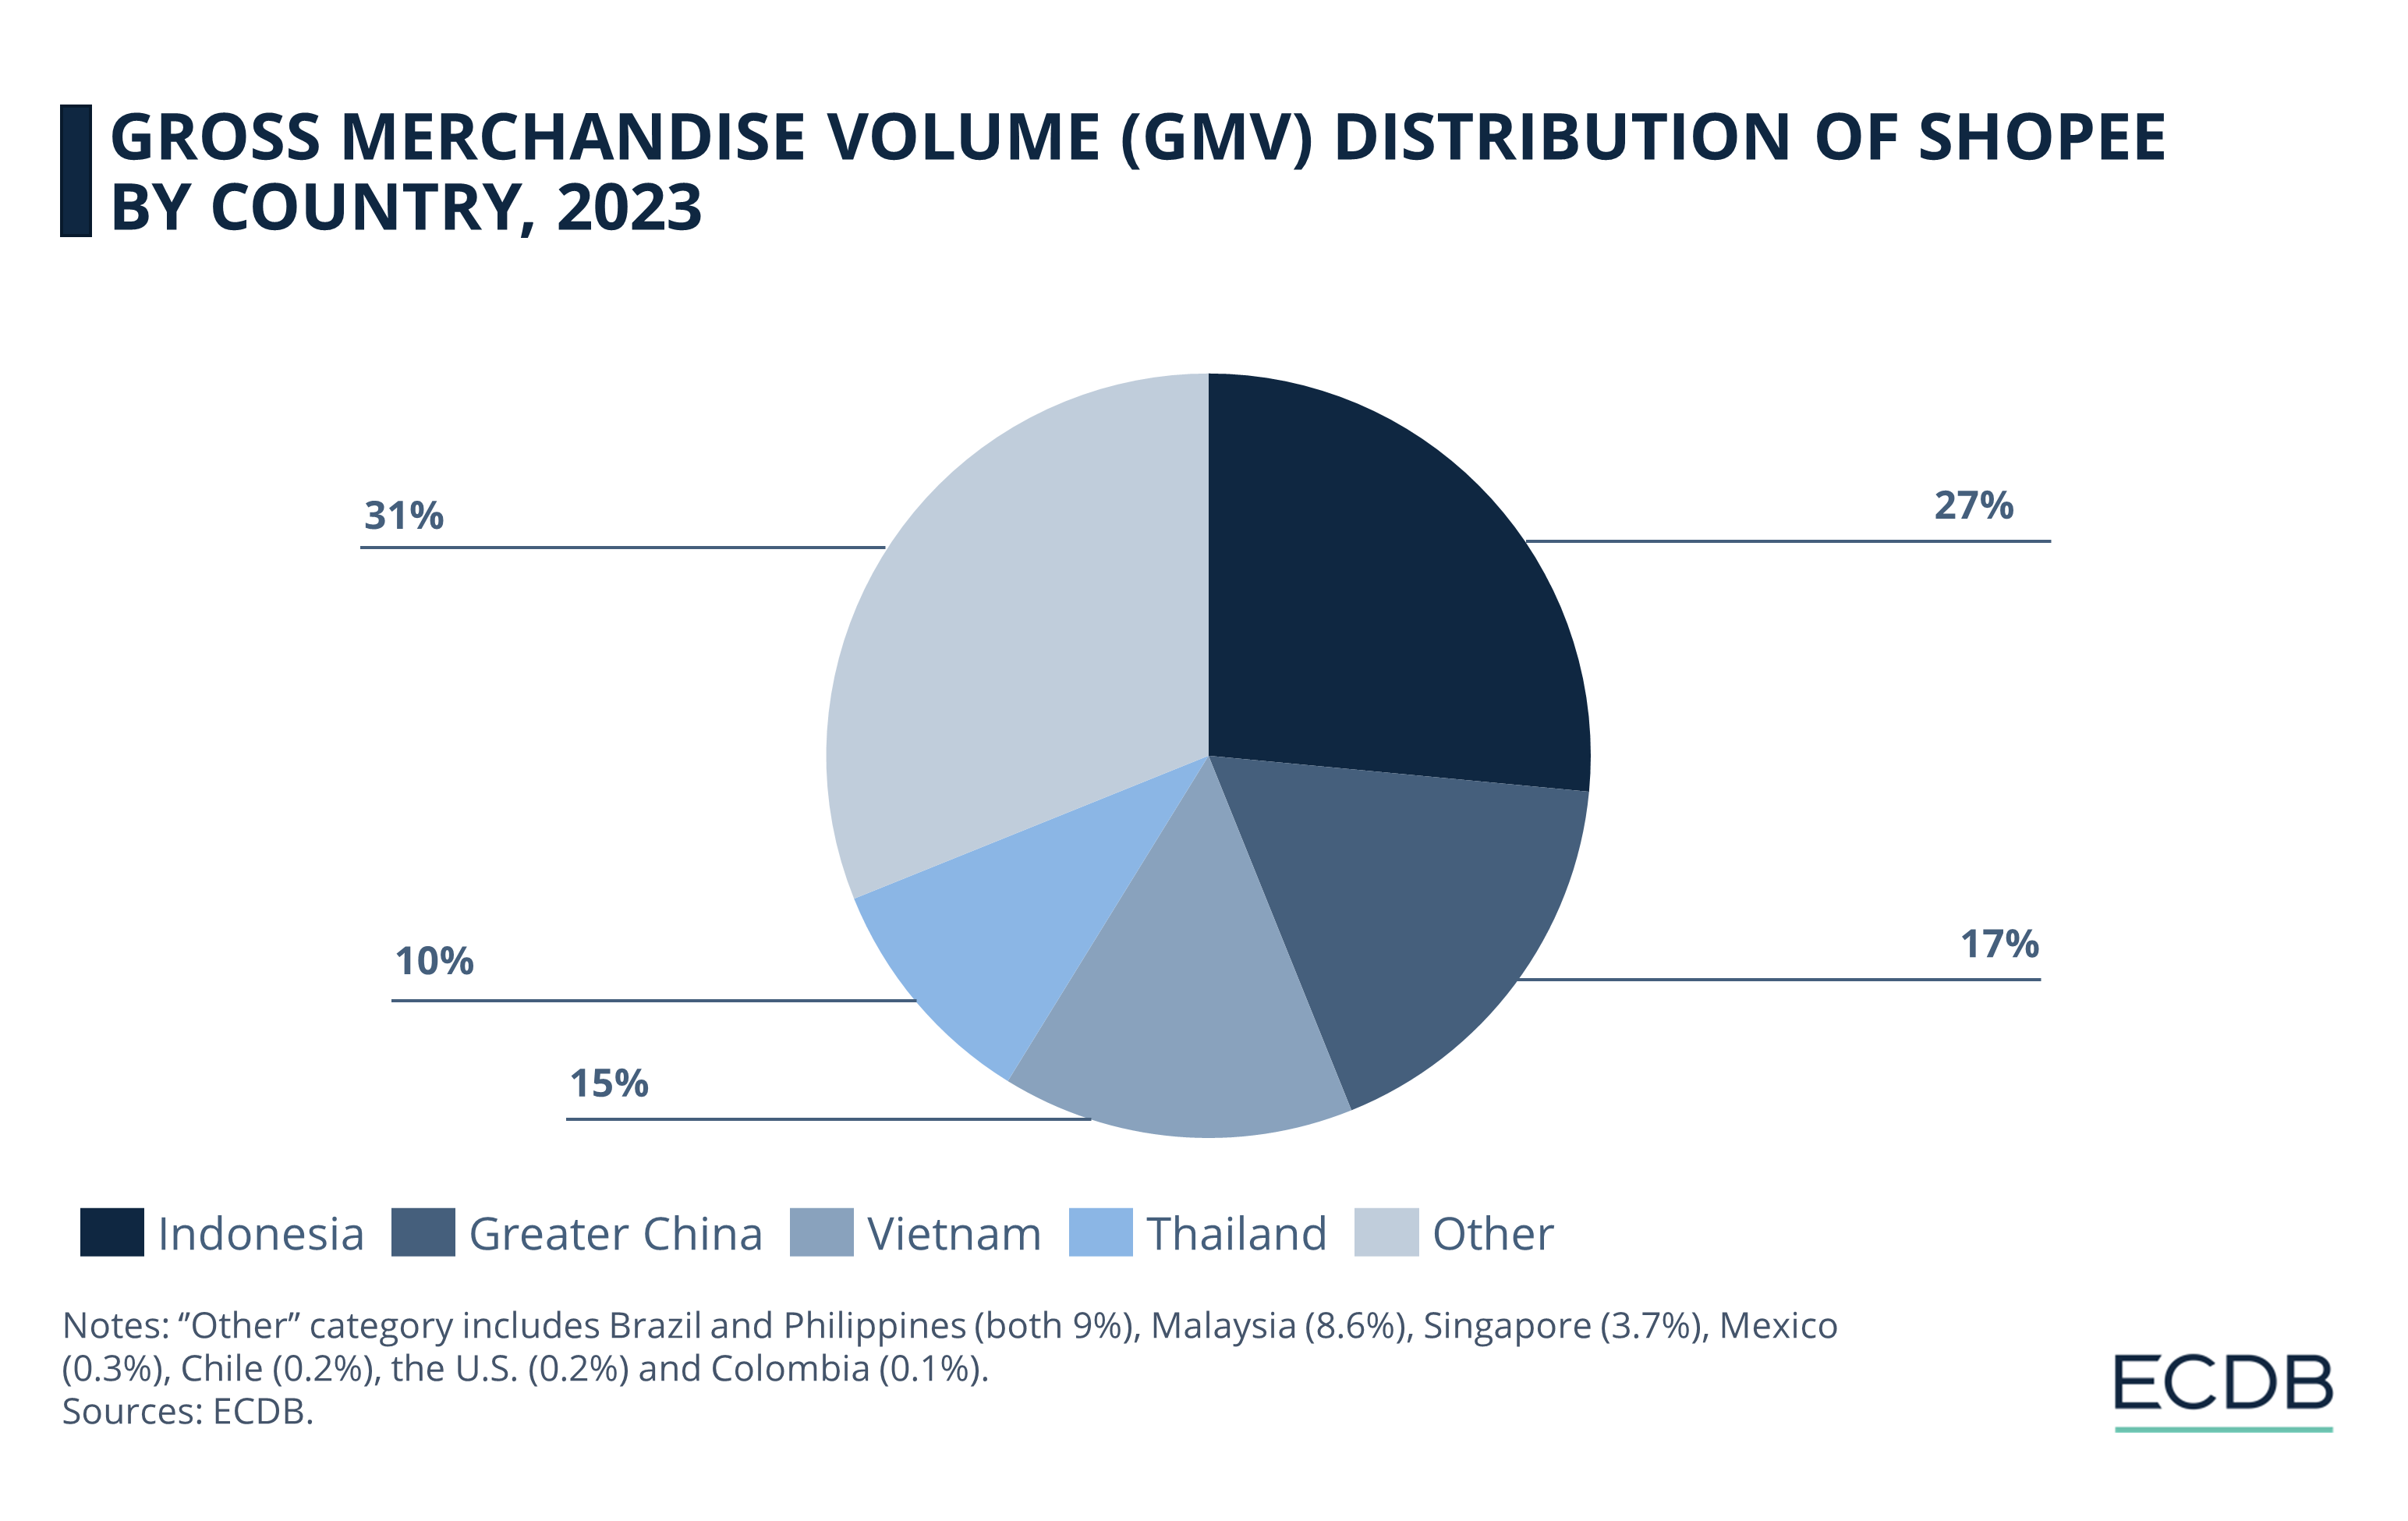 Gross Merchandise Volume (GMV) Distribution of Shopee by Country, 2023